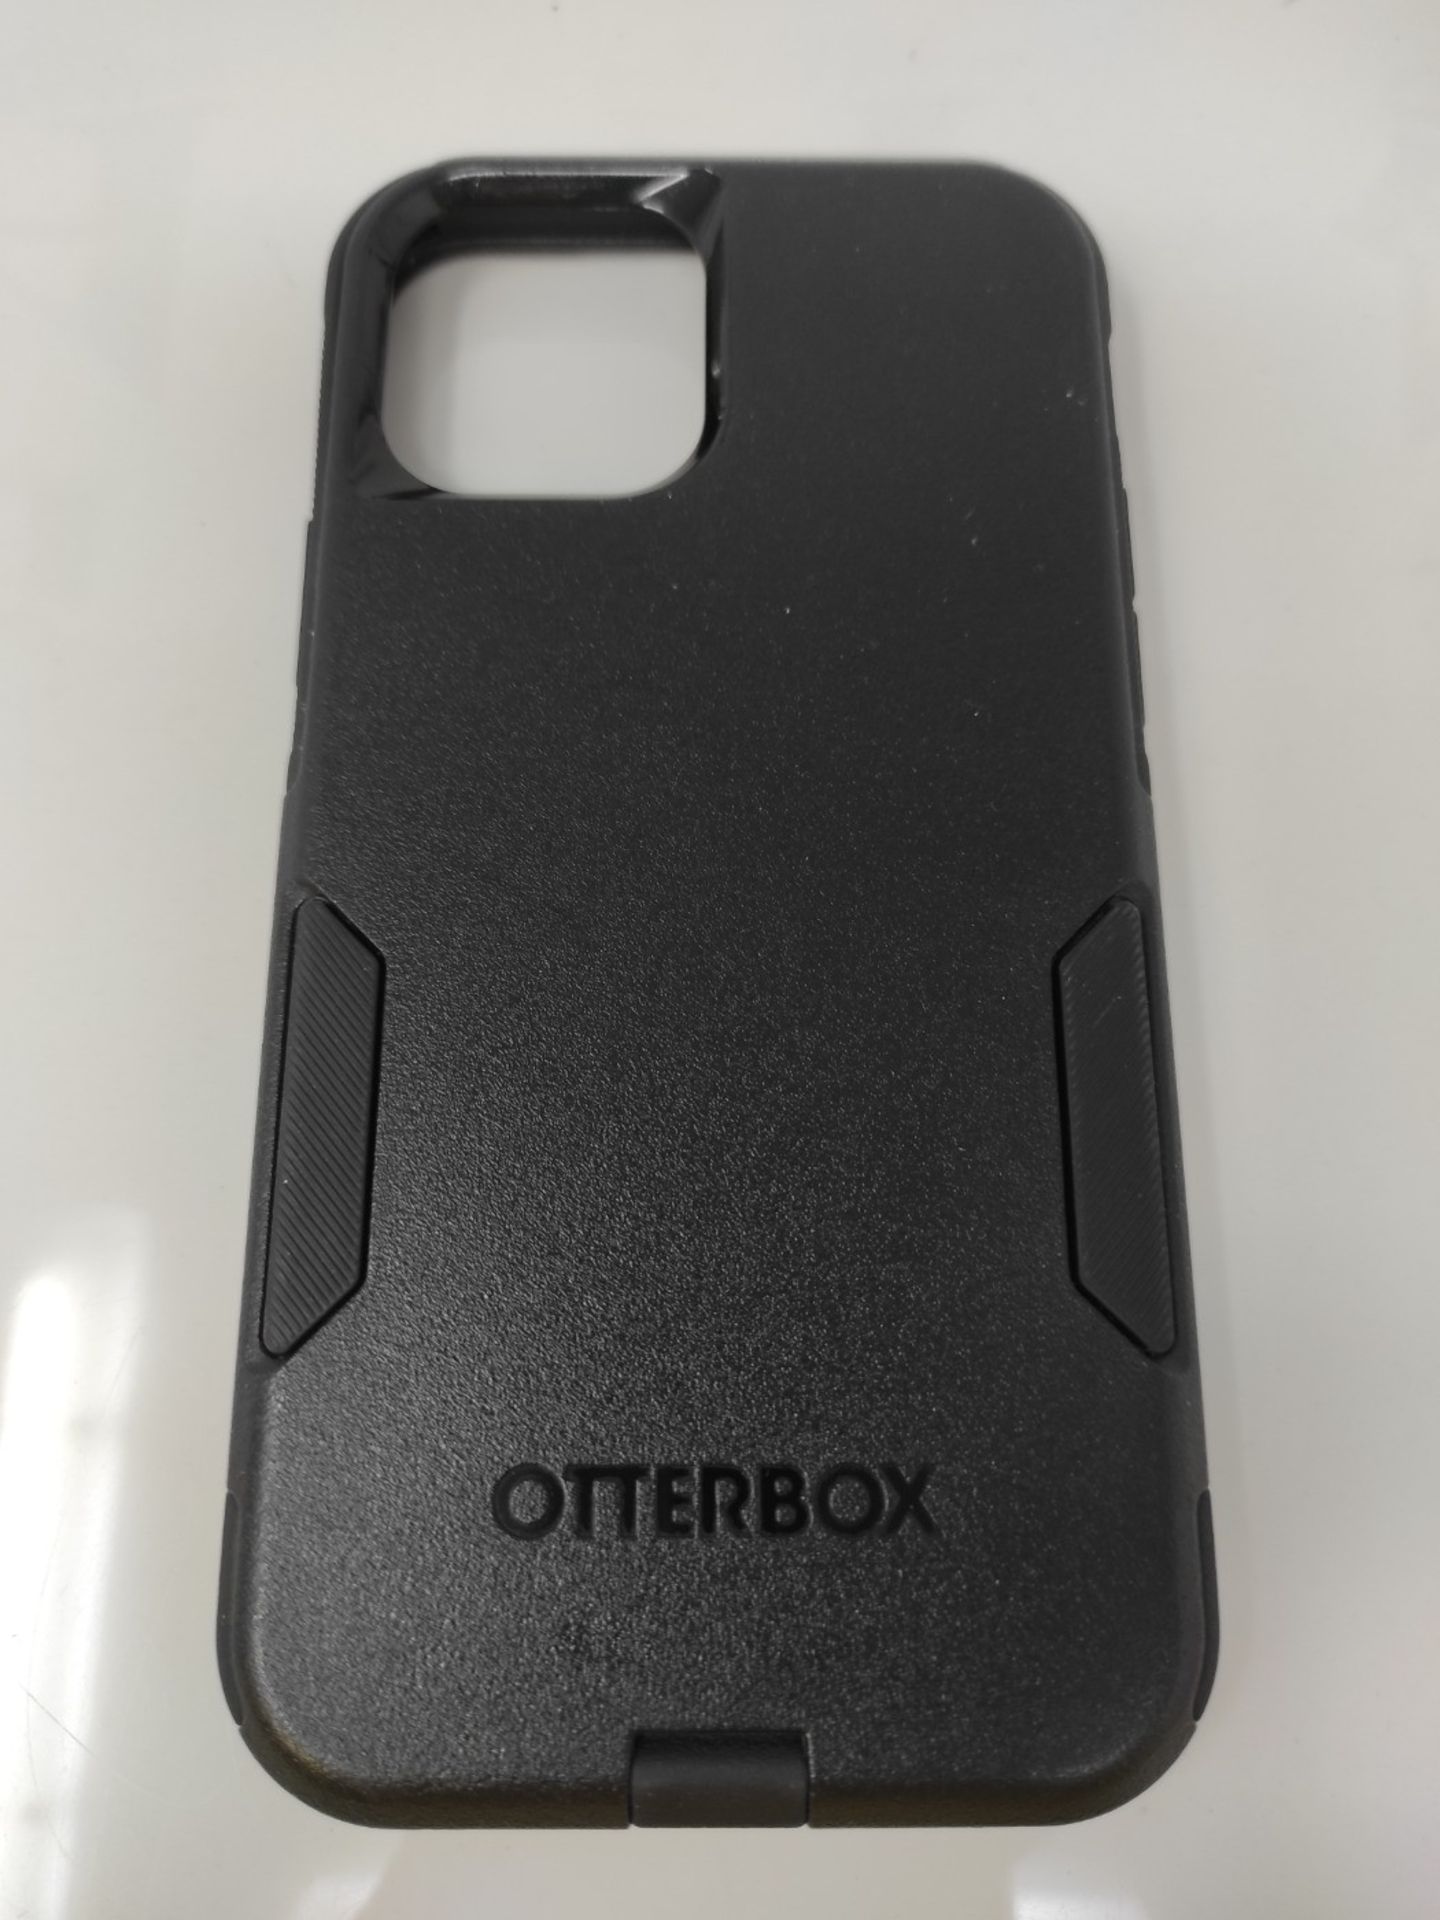 OtterBox Commuter Case for iPhone 12 / iPhone 12 Pro, Shockproof, Drop proof, Rugged, - Image 2 of 3